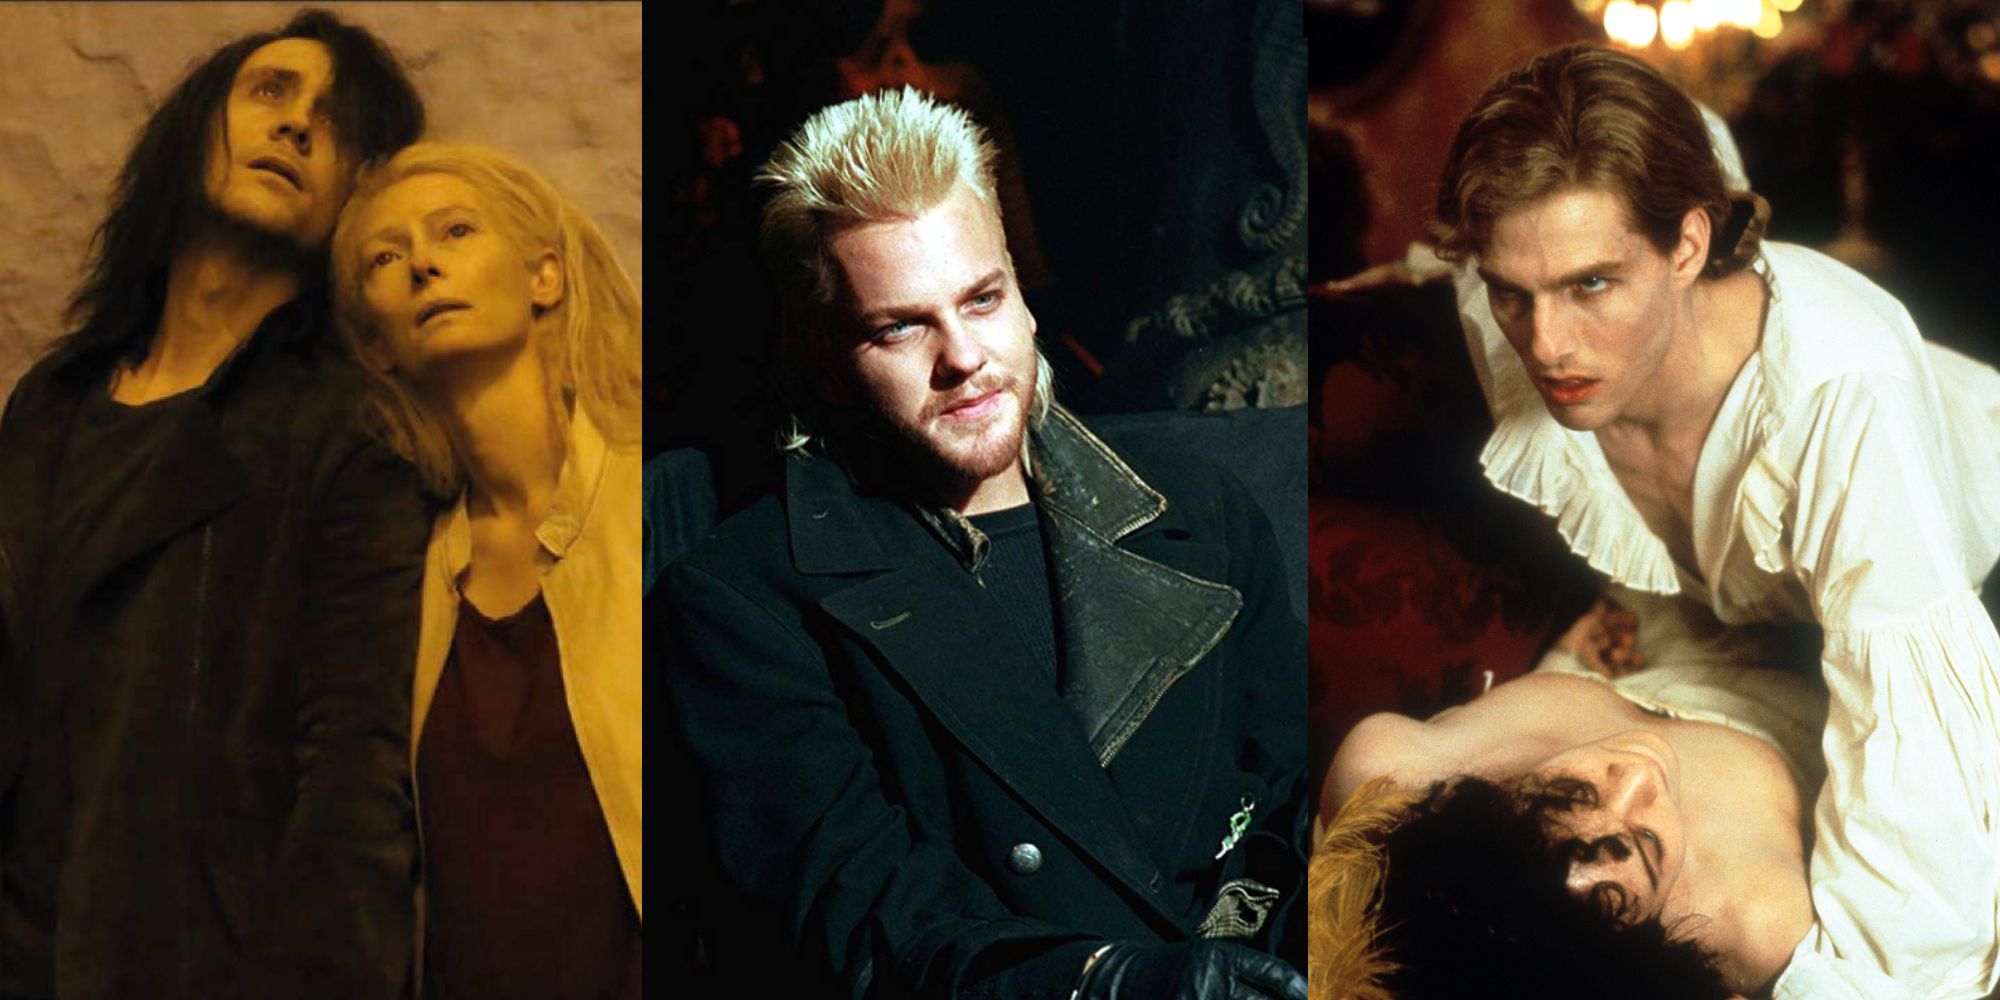 Image featuring main characters from iconic vampire movies Only Lovers Left Alive, The Lost Boys and Interview with the Vampire.